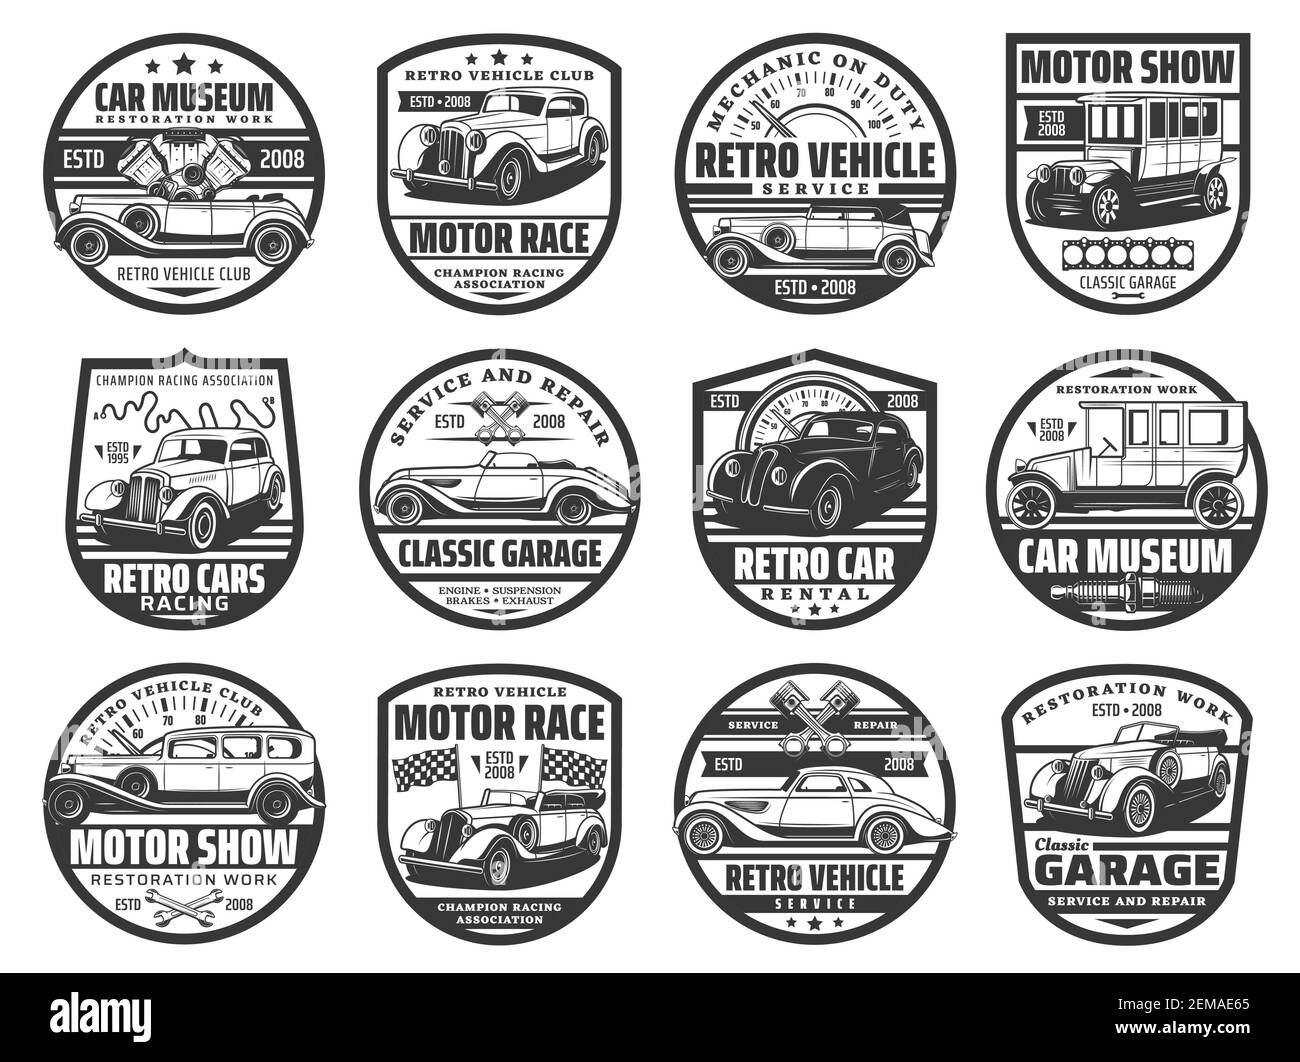 Motor show, retro cars museum, rally speed races club vector icons. Classic automobiles repair center and automotive restoration garage, rarity transp Stock Vector